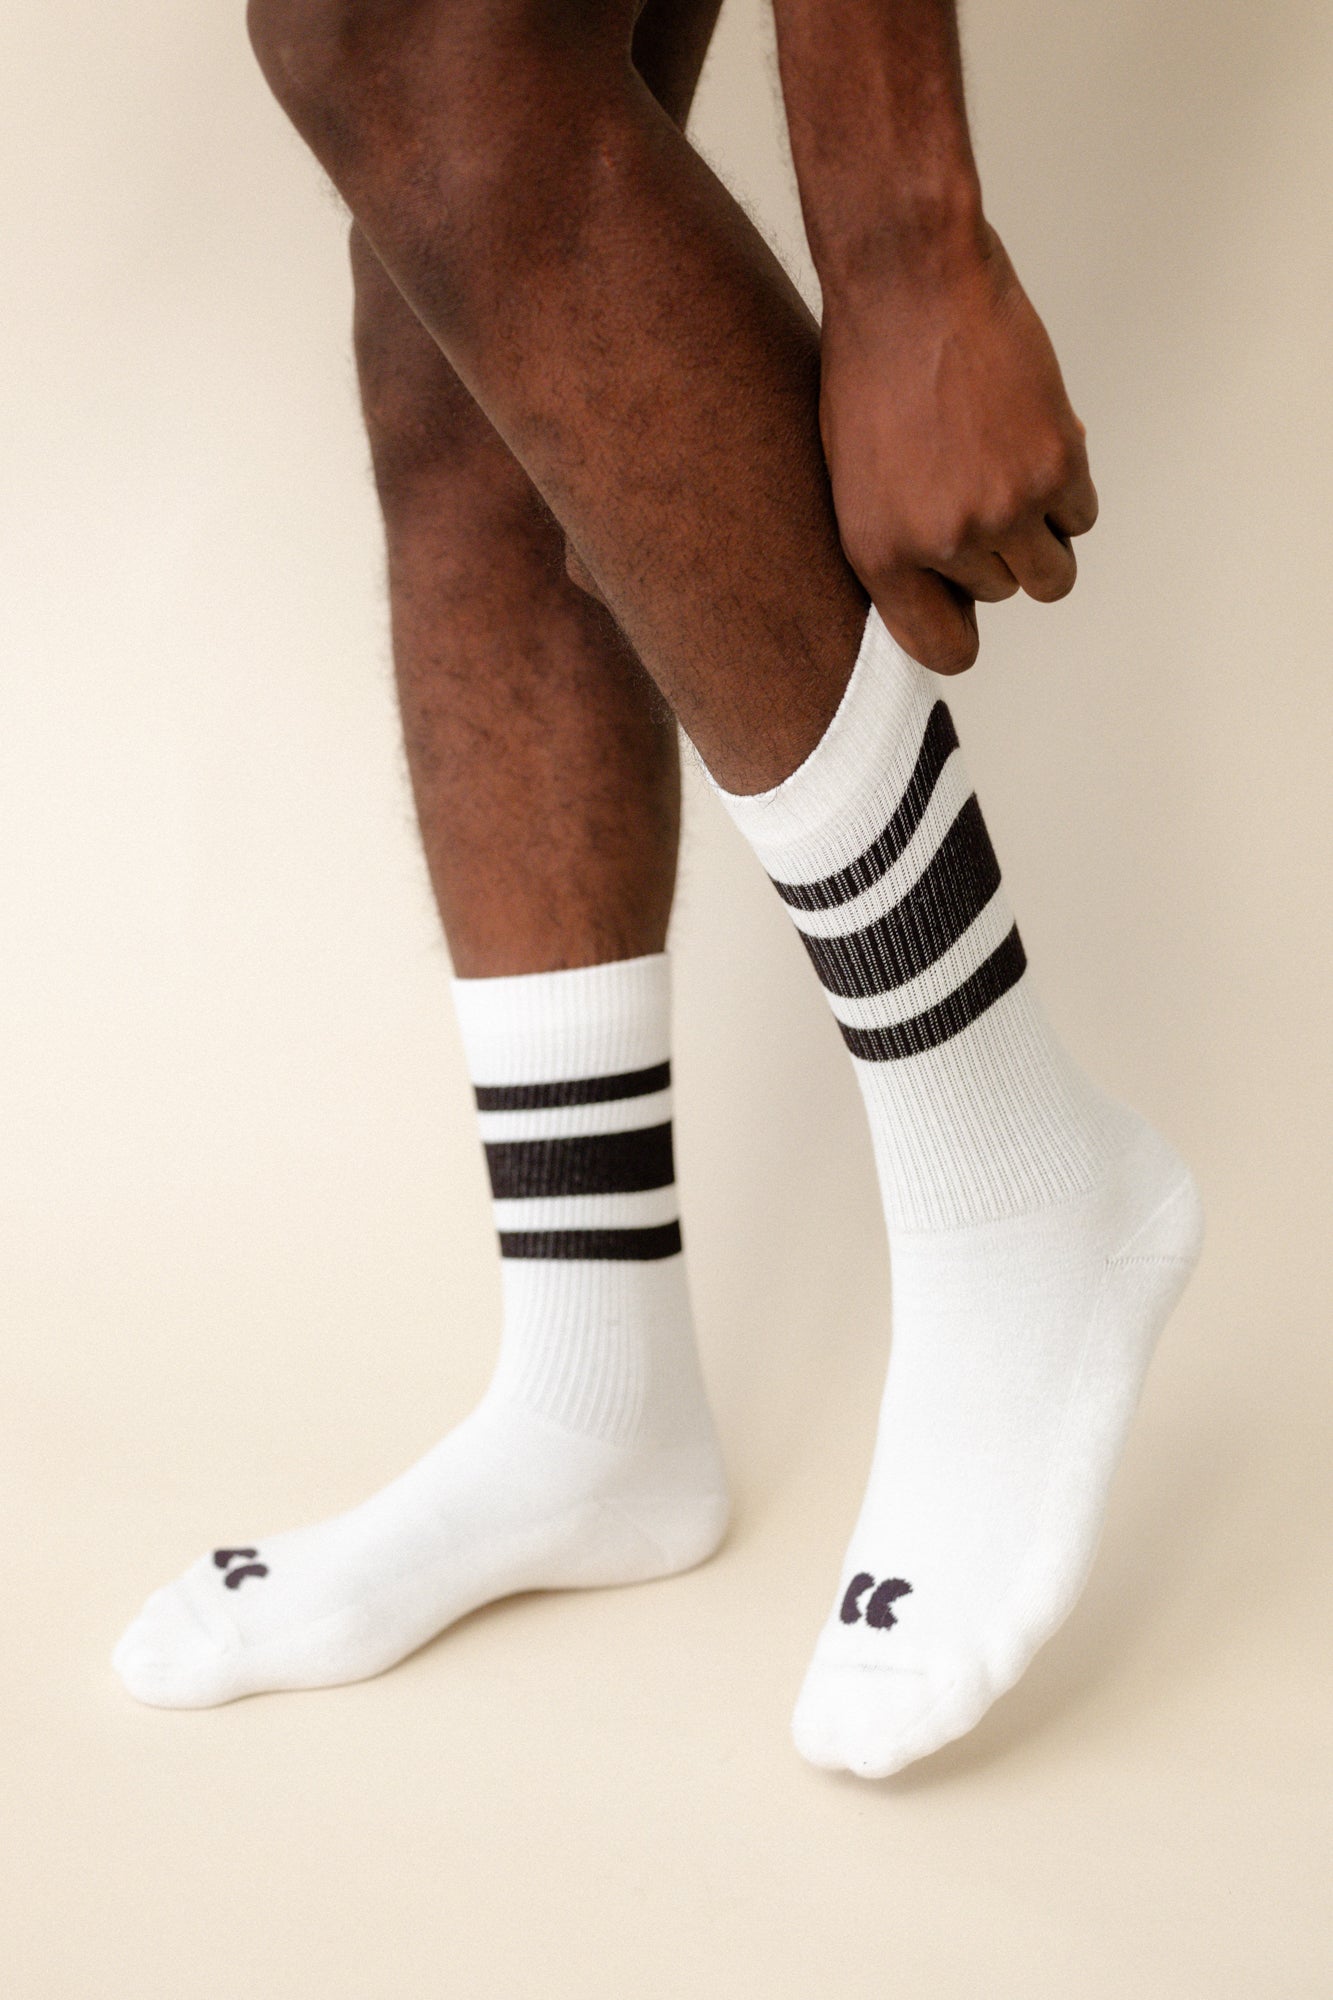 black model wearing calf length sports socks in white with black stripe with CC logo on the toe